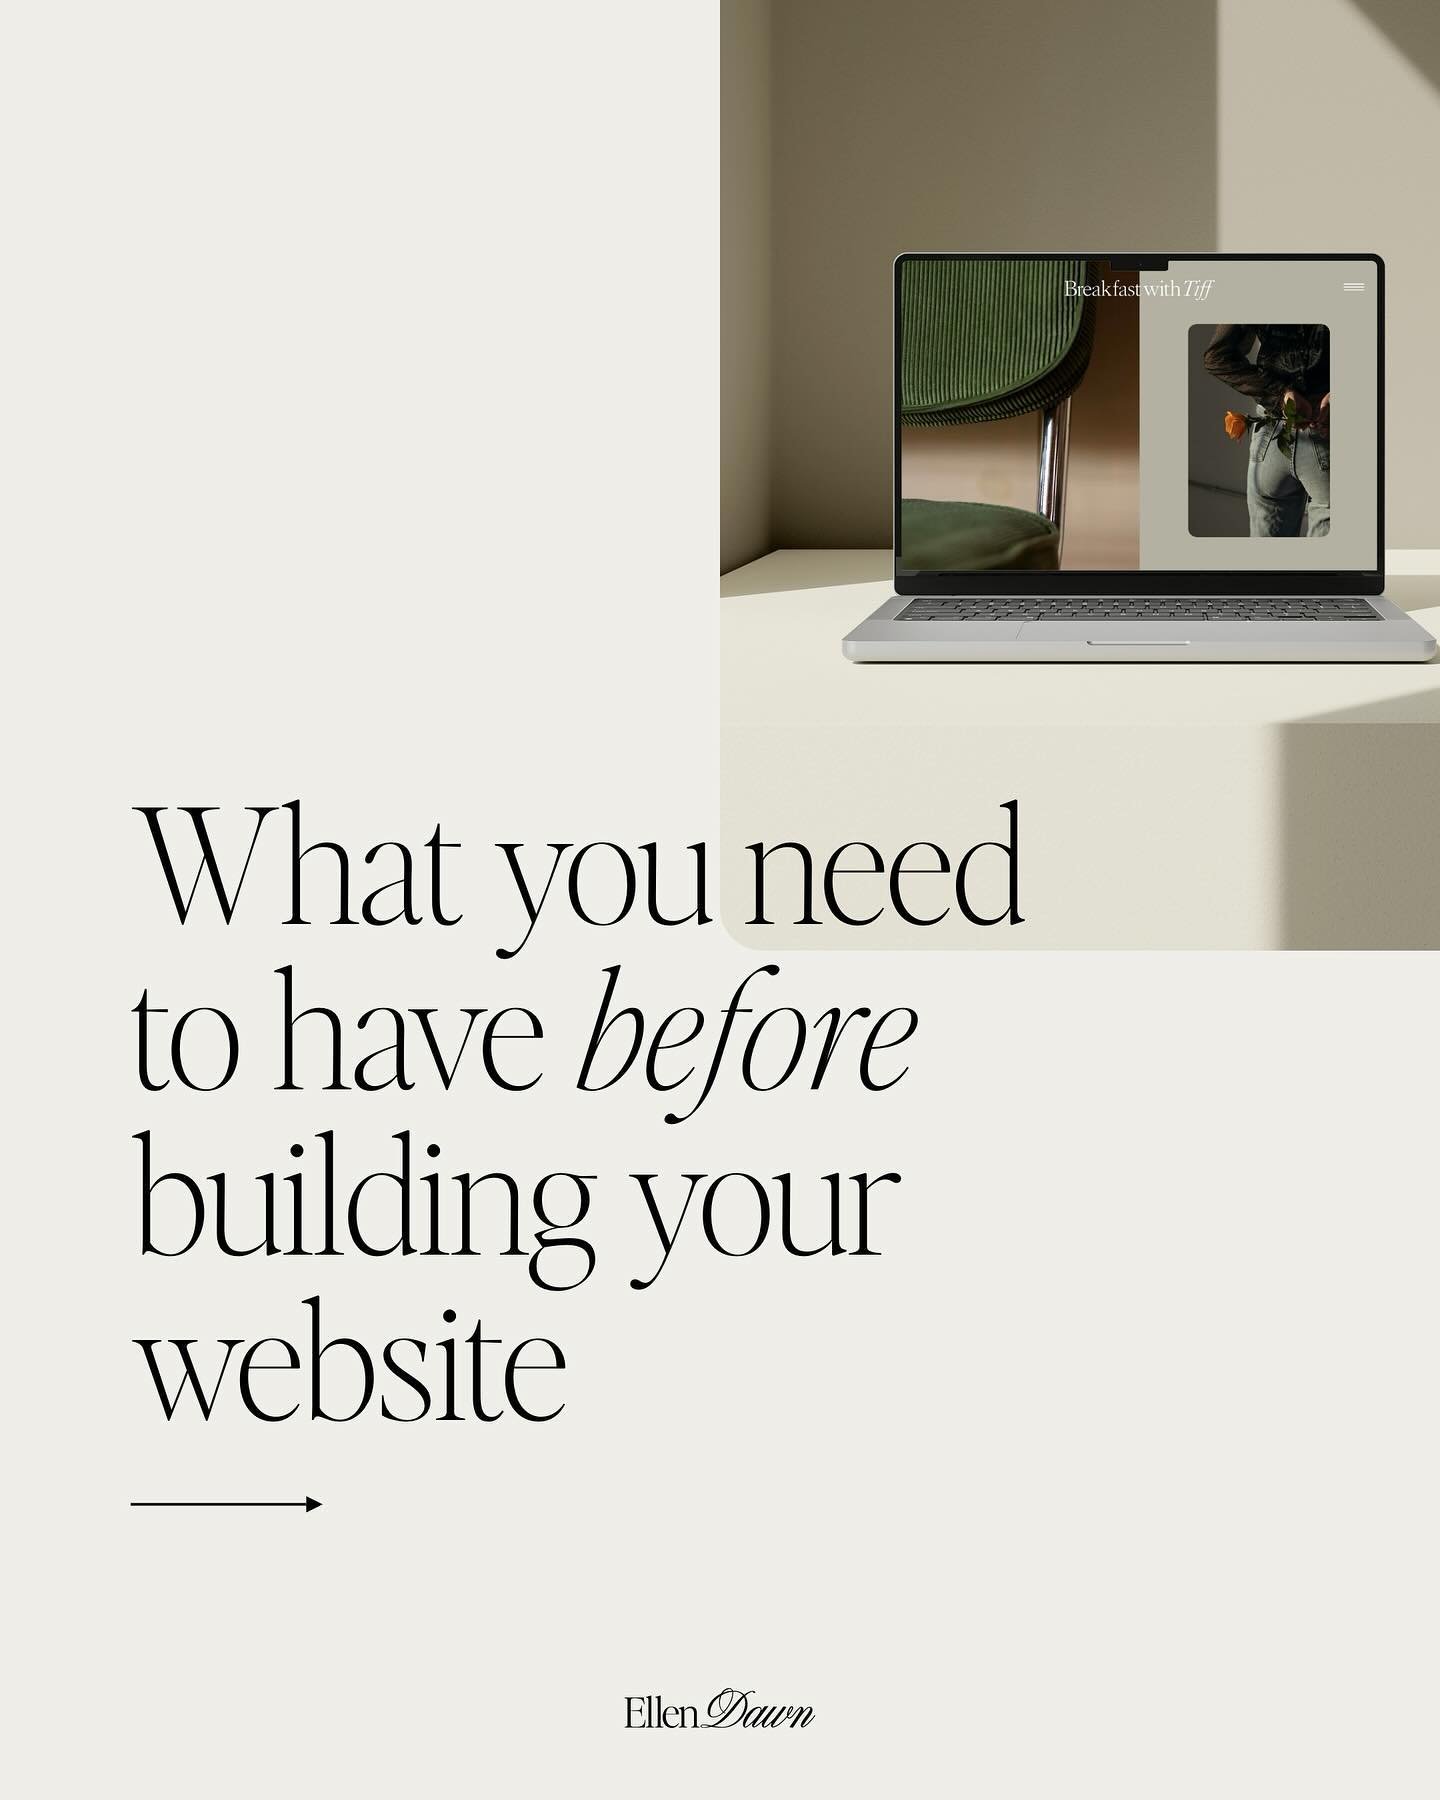 You want to build a beautiful website that connects with your audience, turns lookers into buyers and effectively represents your brand, but not sure where to start?

I&rsquo;ve got you! Here are the three key elements you need to have in place befor